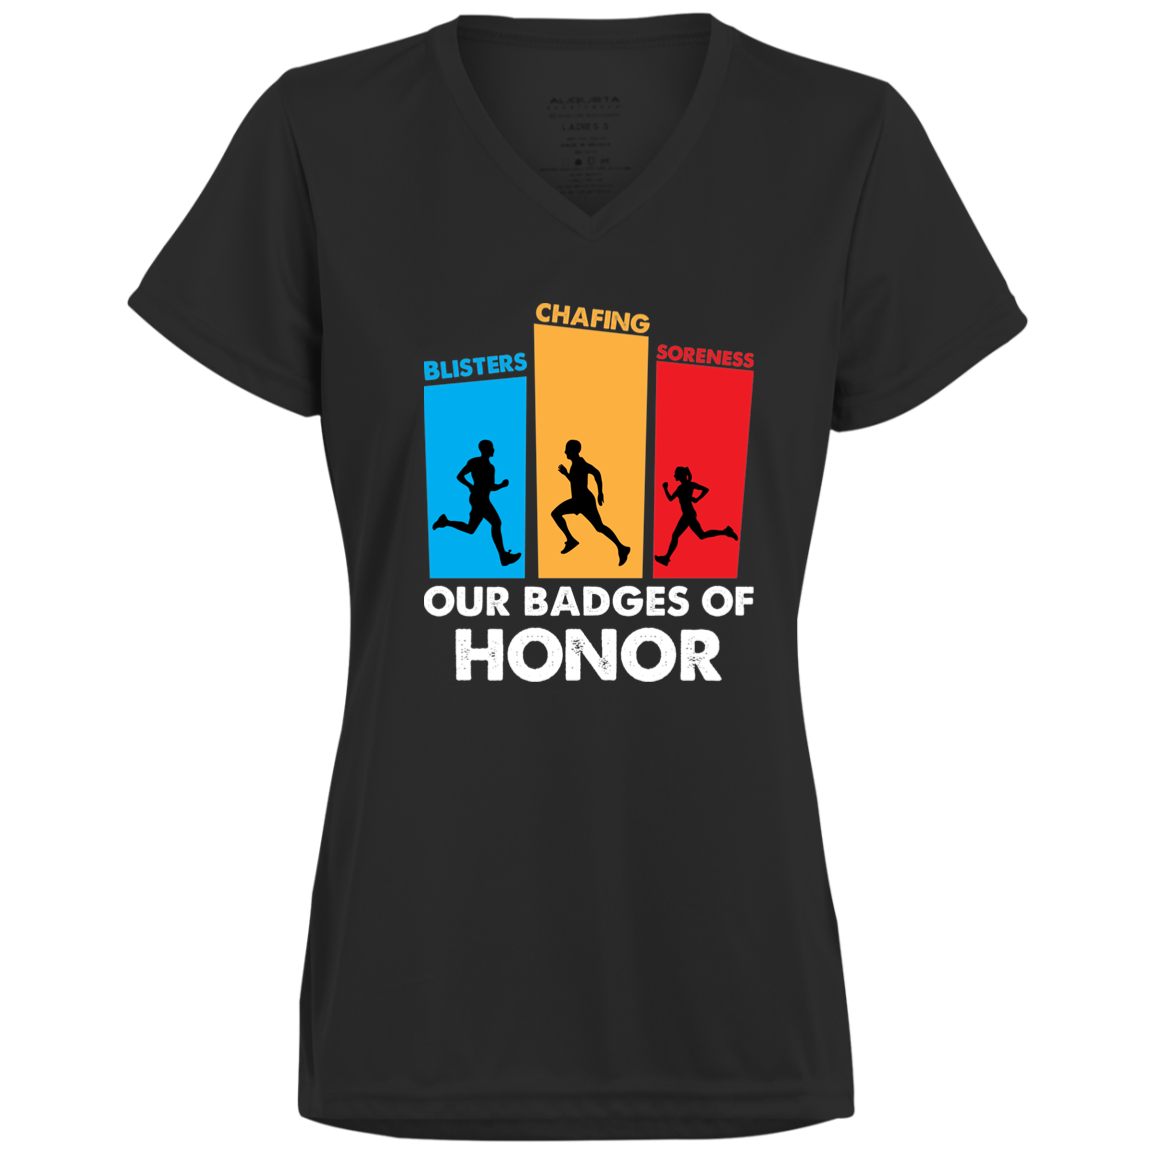 Women's Inspirational Top Blisters, chafing, soreness - our badges of honor